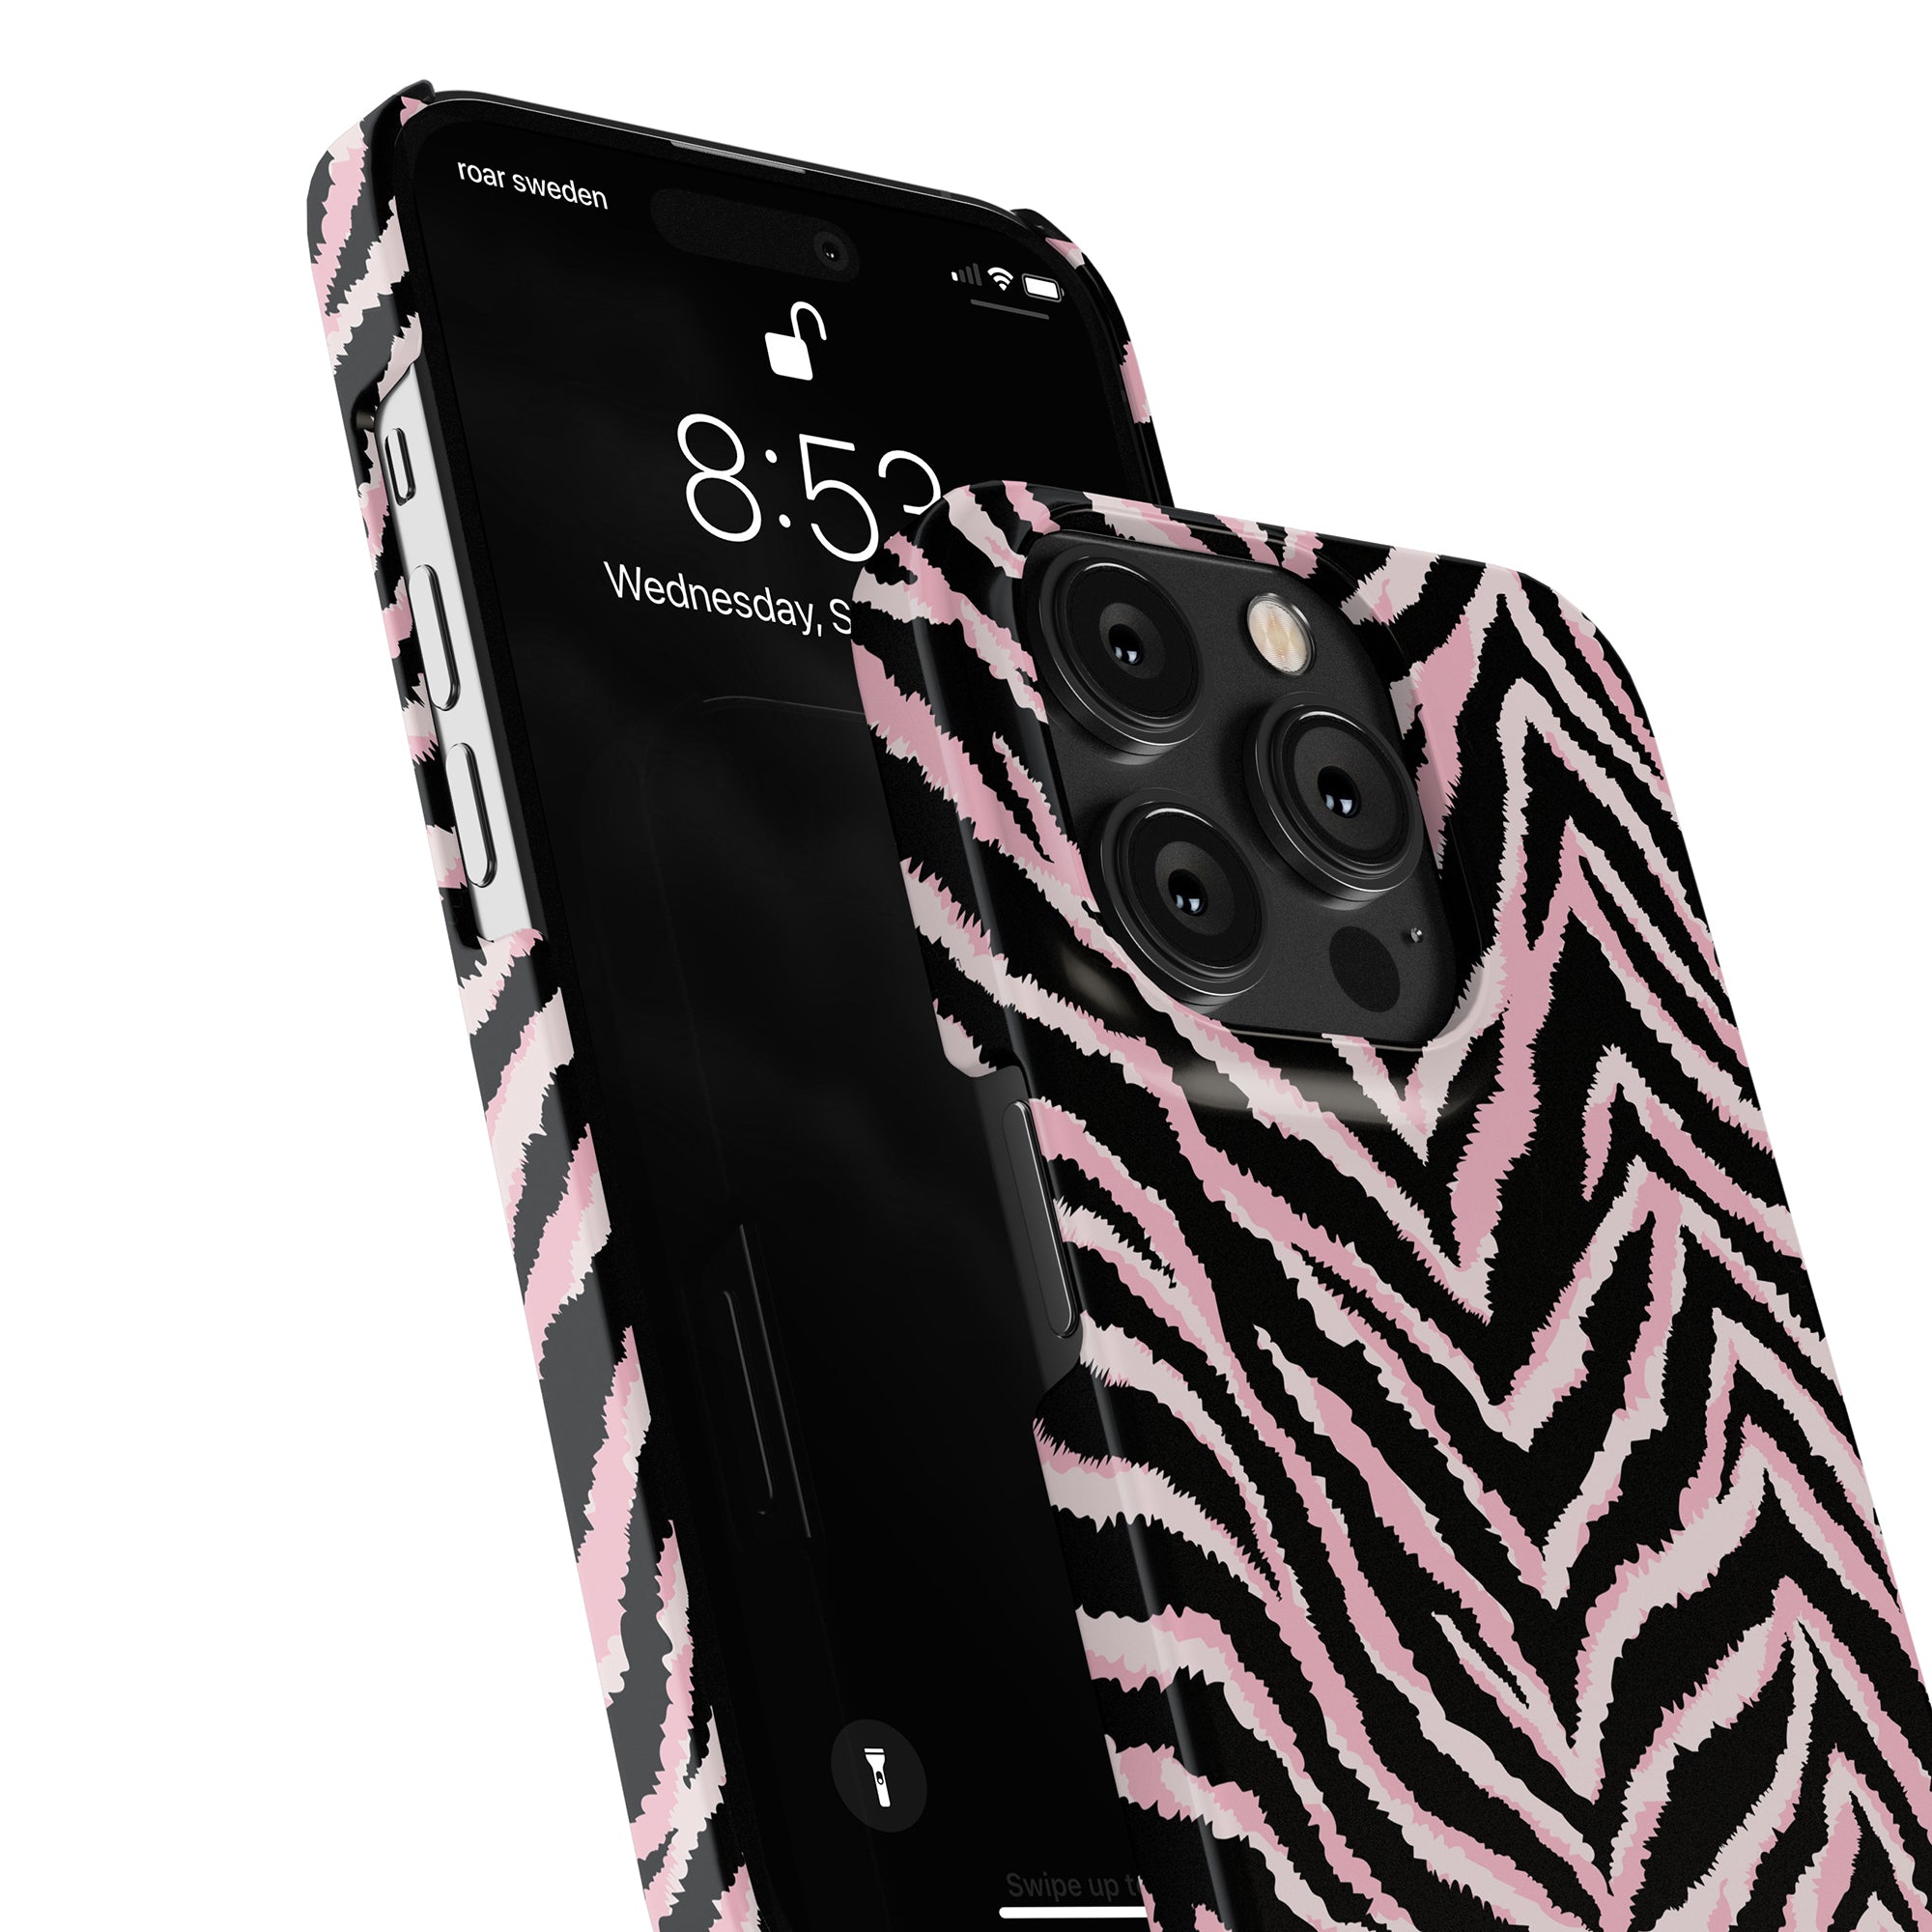 Stripes - Slim case, perfect for any stylish individual looking for a sleek and trendy phone cover. This case features a unique zebra pattern in pink and black, adding